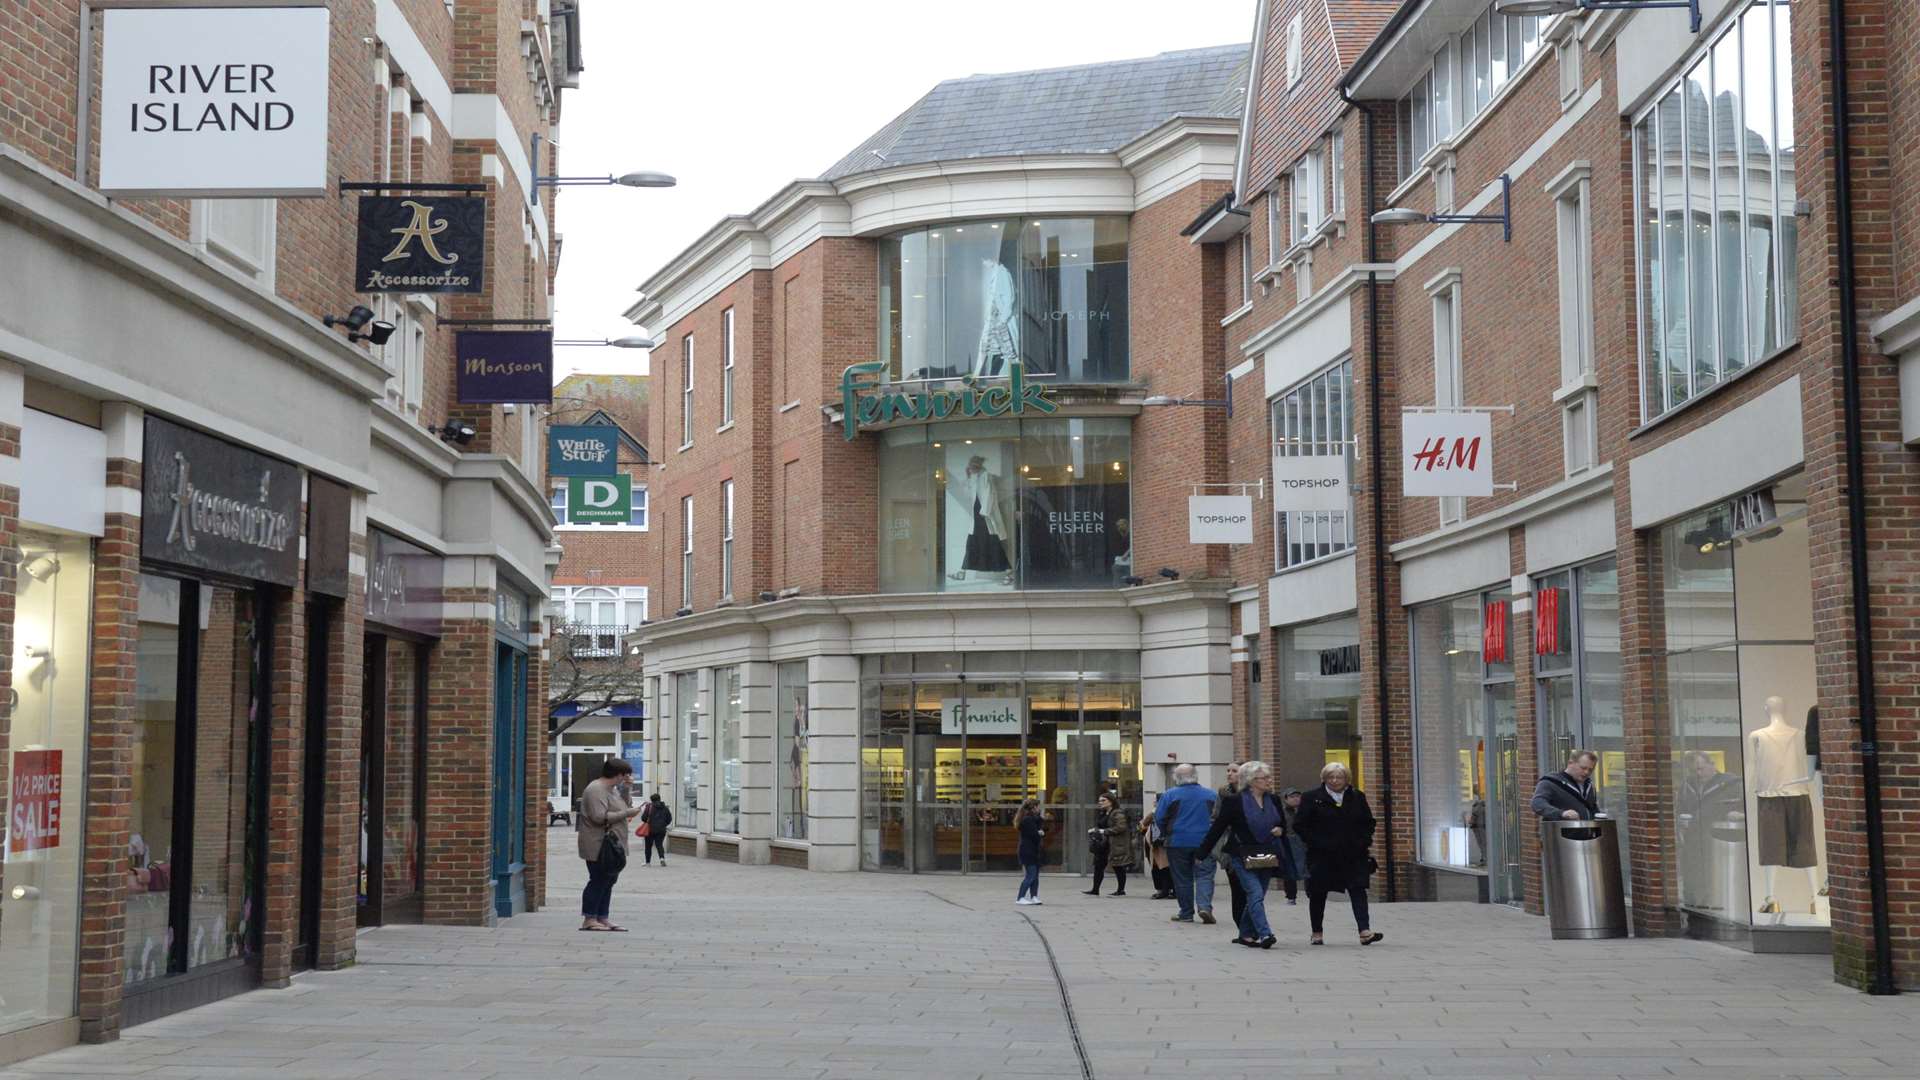 The Whitefriars shopping centre in Canterbury.